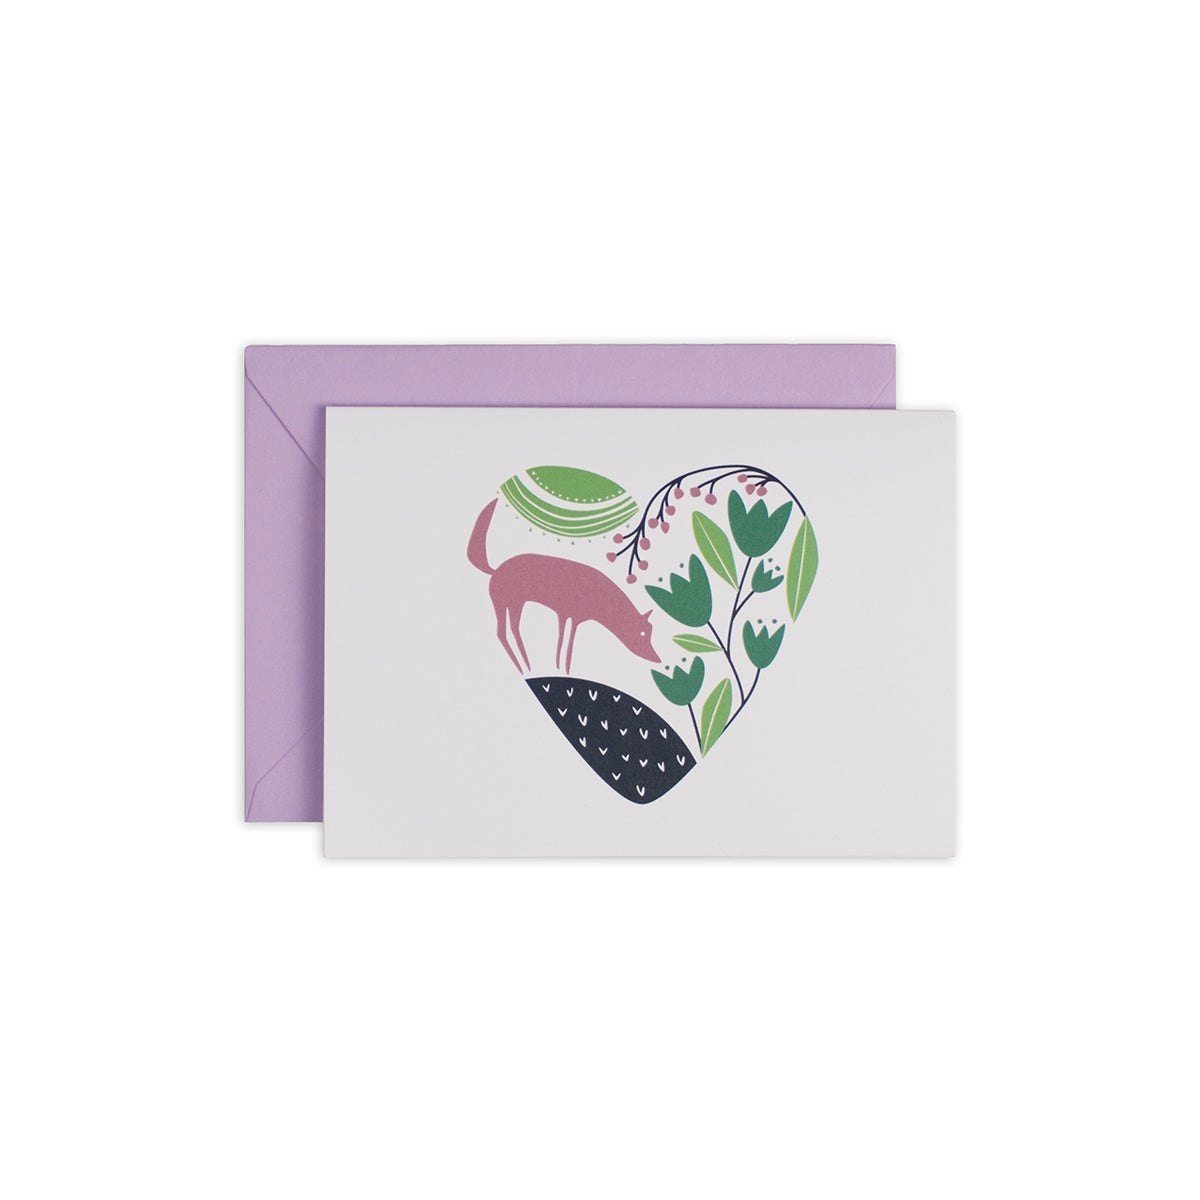 forest elements (fox, leaves, flowers) contained in a heart shape on a white card